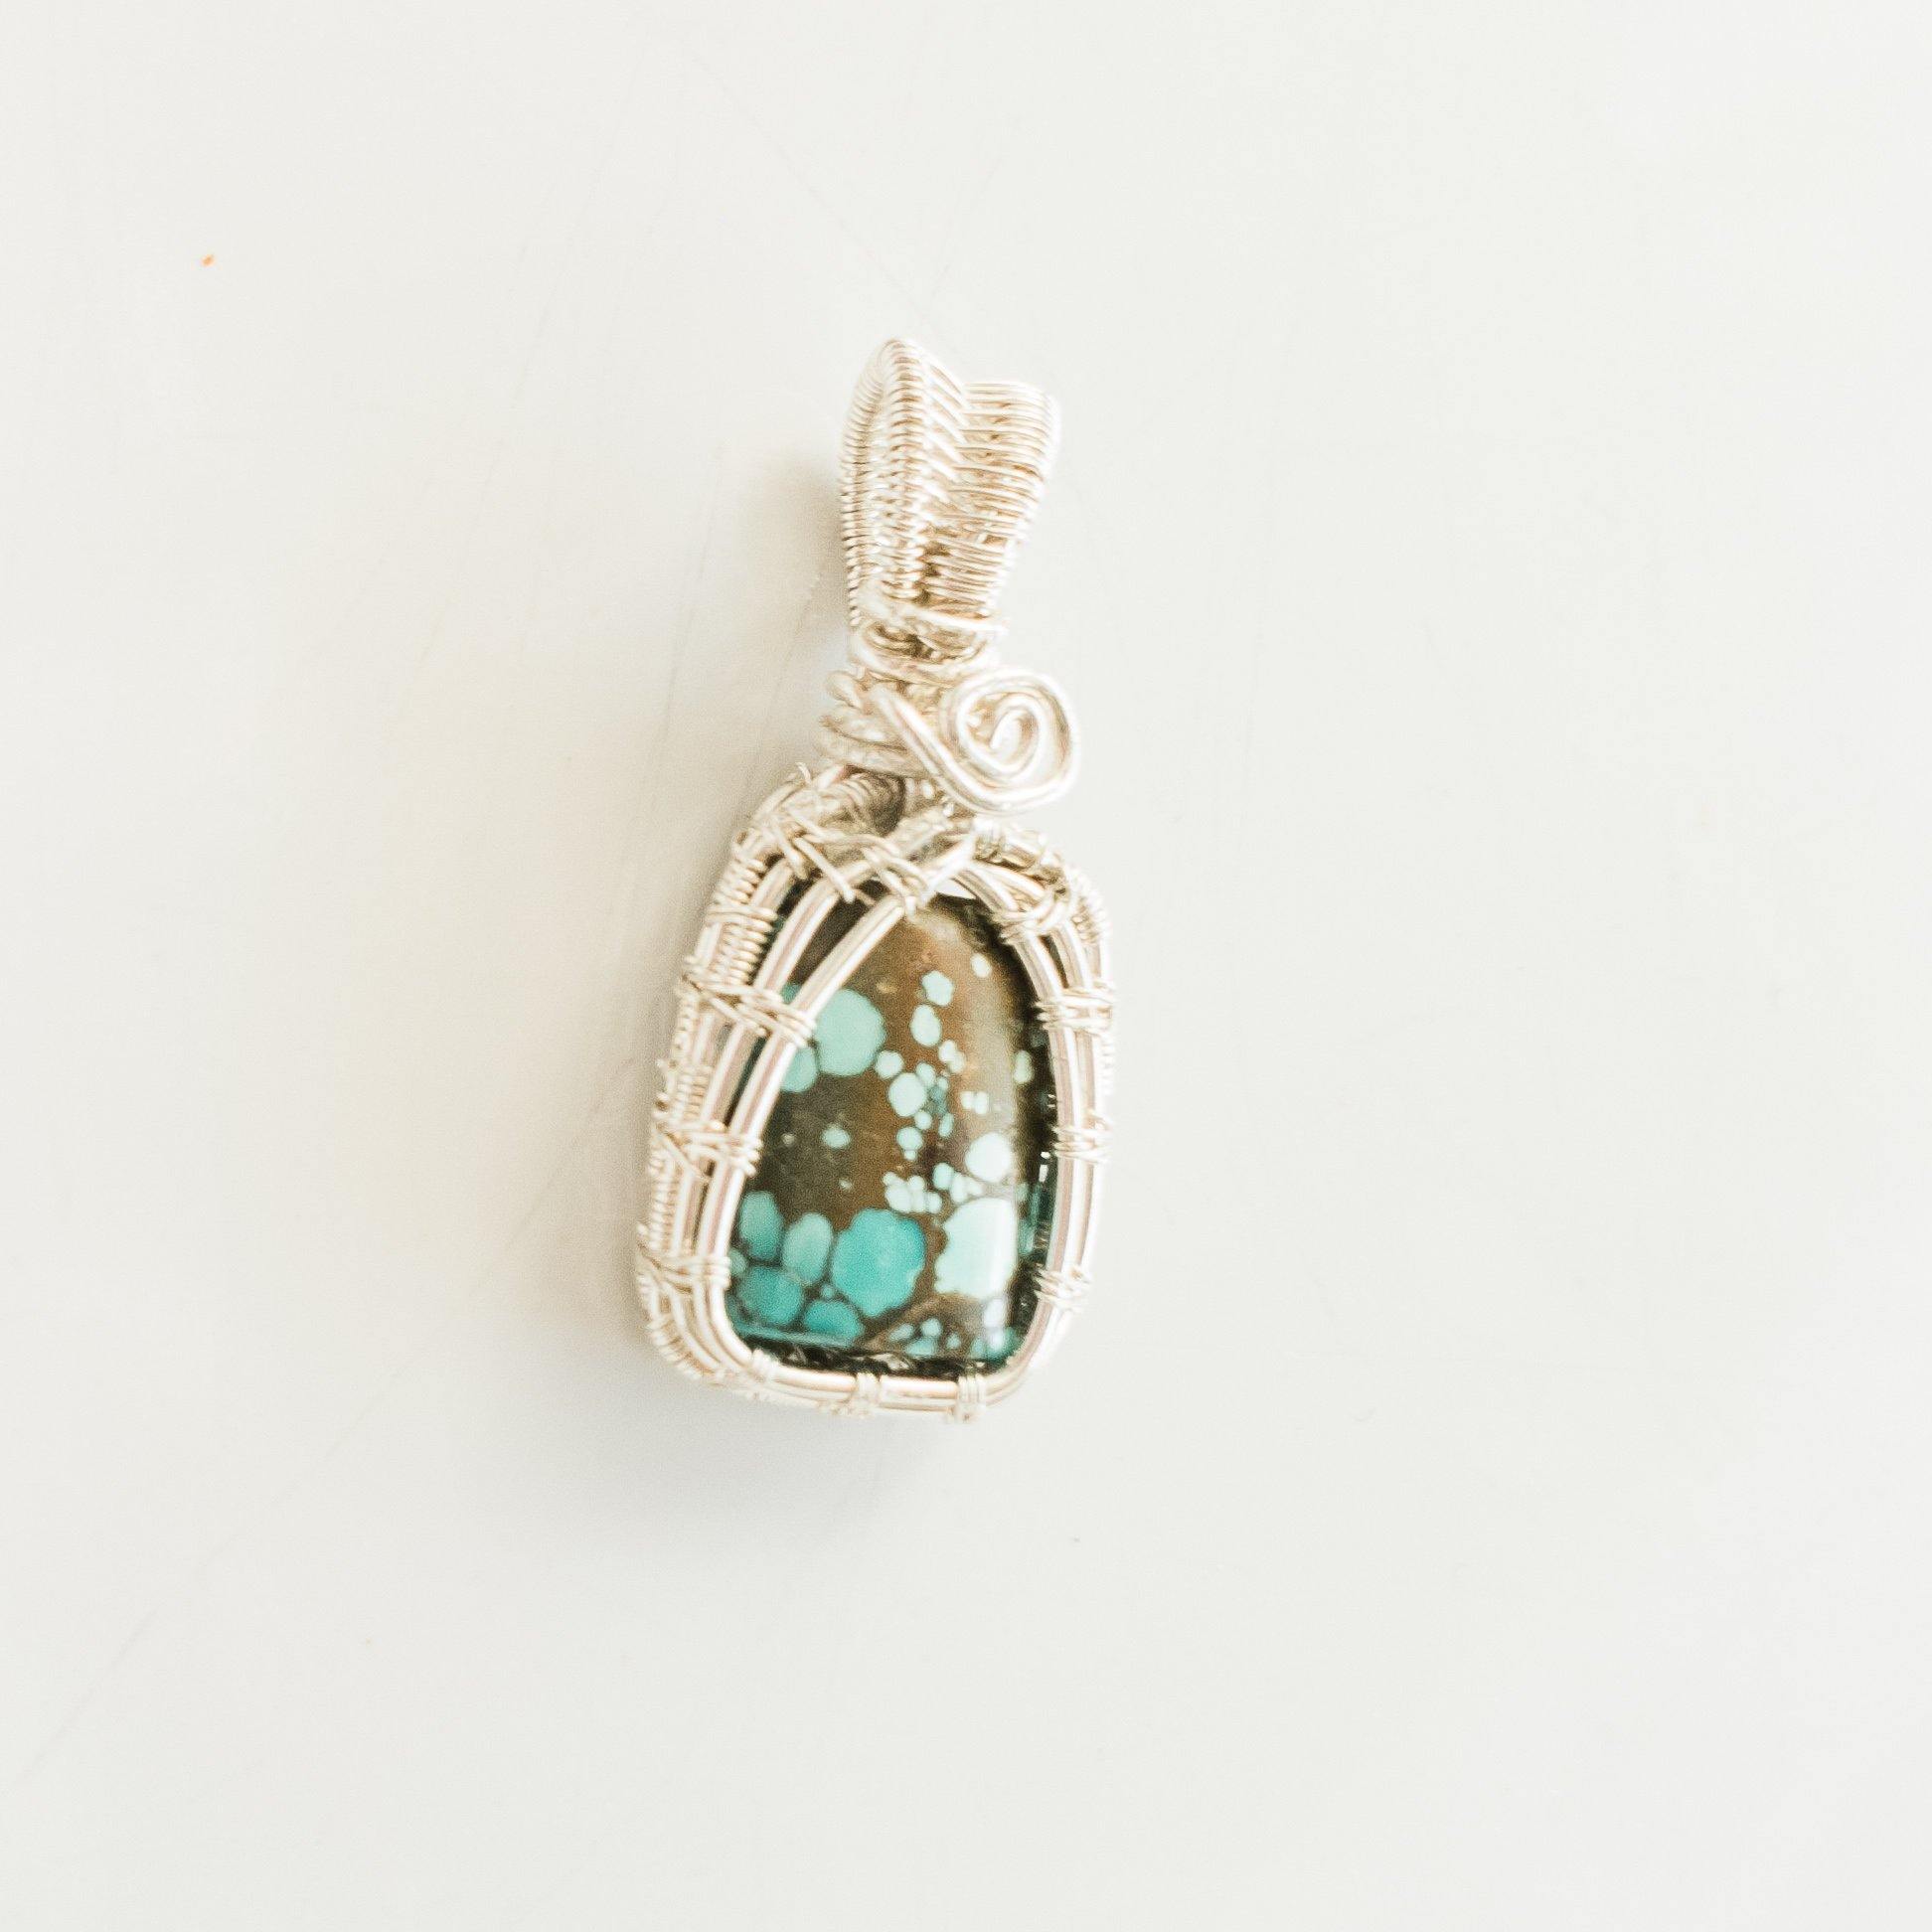 Laguna Collection - Dainty Turquoise Pendant weaved in Sterling Silver front view - BellaChel Jeweler